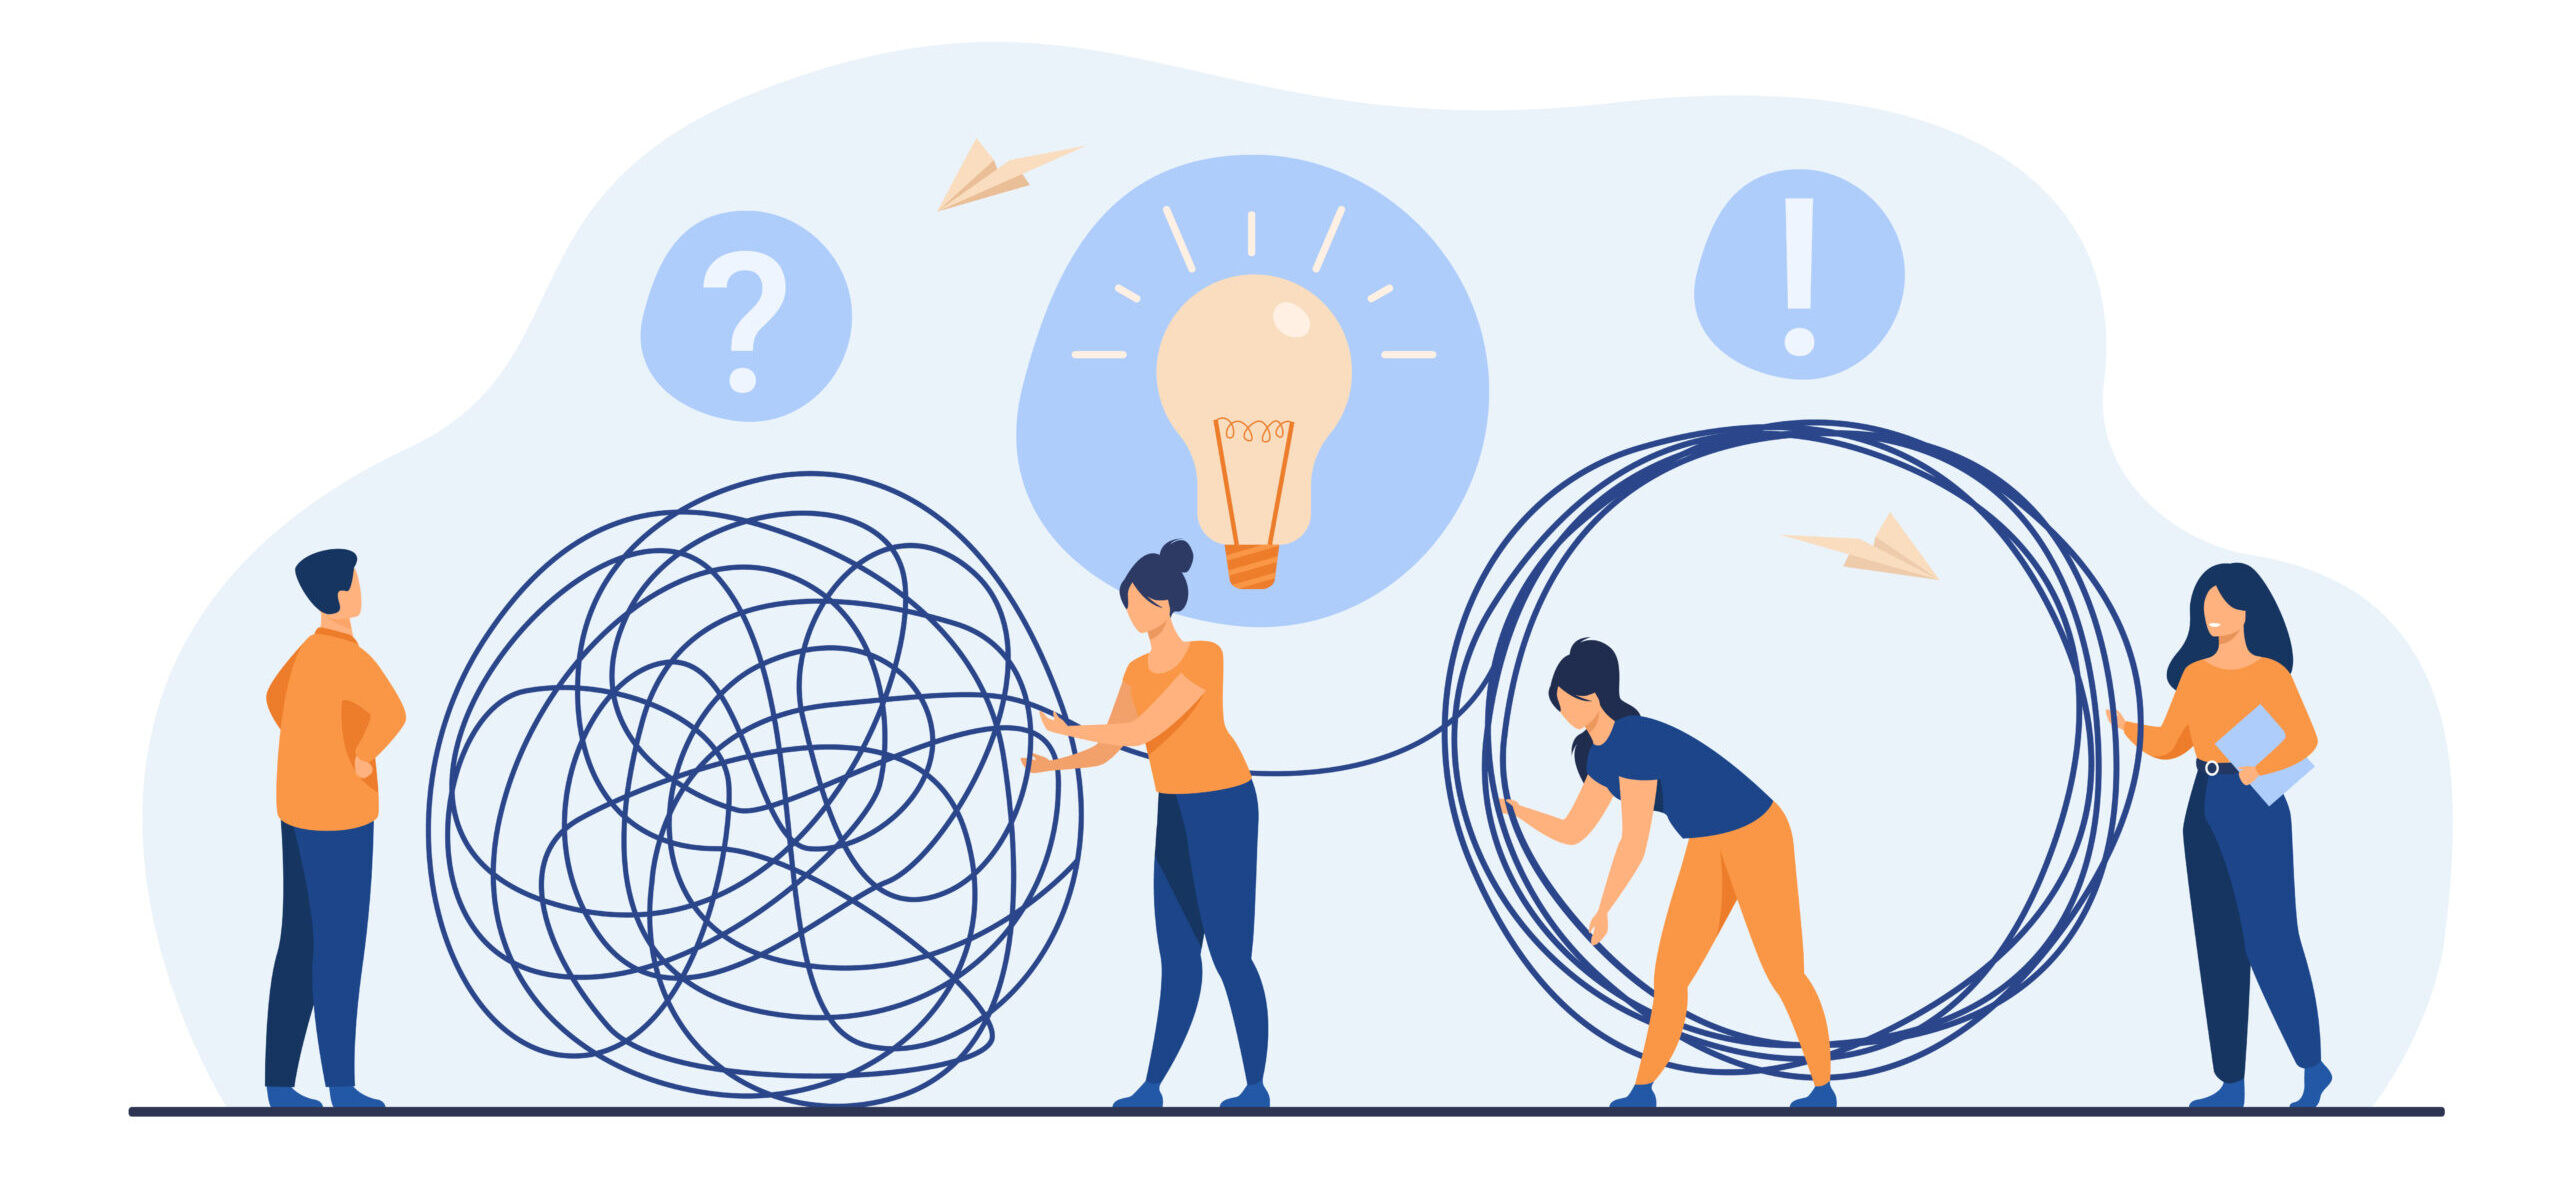 Team Of Crisis Managers Solving Businessman Problems. Employees With Lightbulb Unraveling Tangle. Vector Illustration For Teamwork, Solution, Management Concept